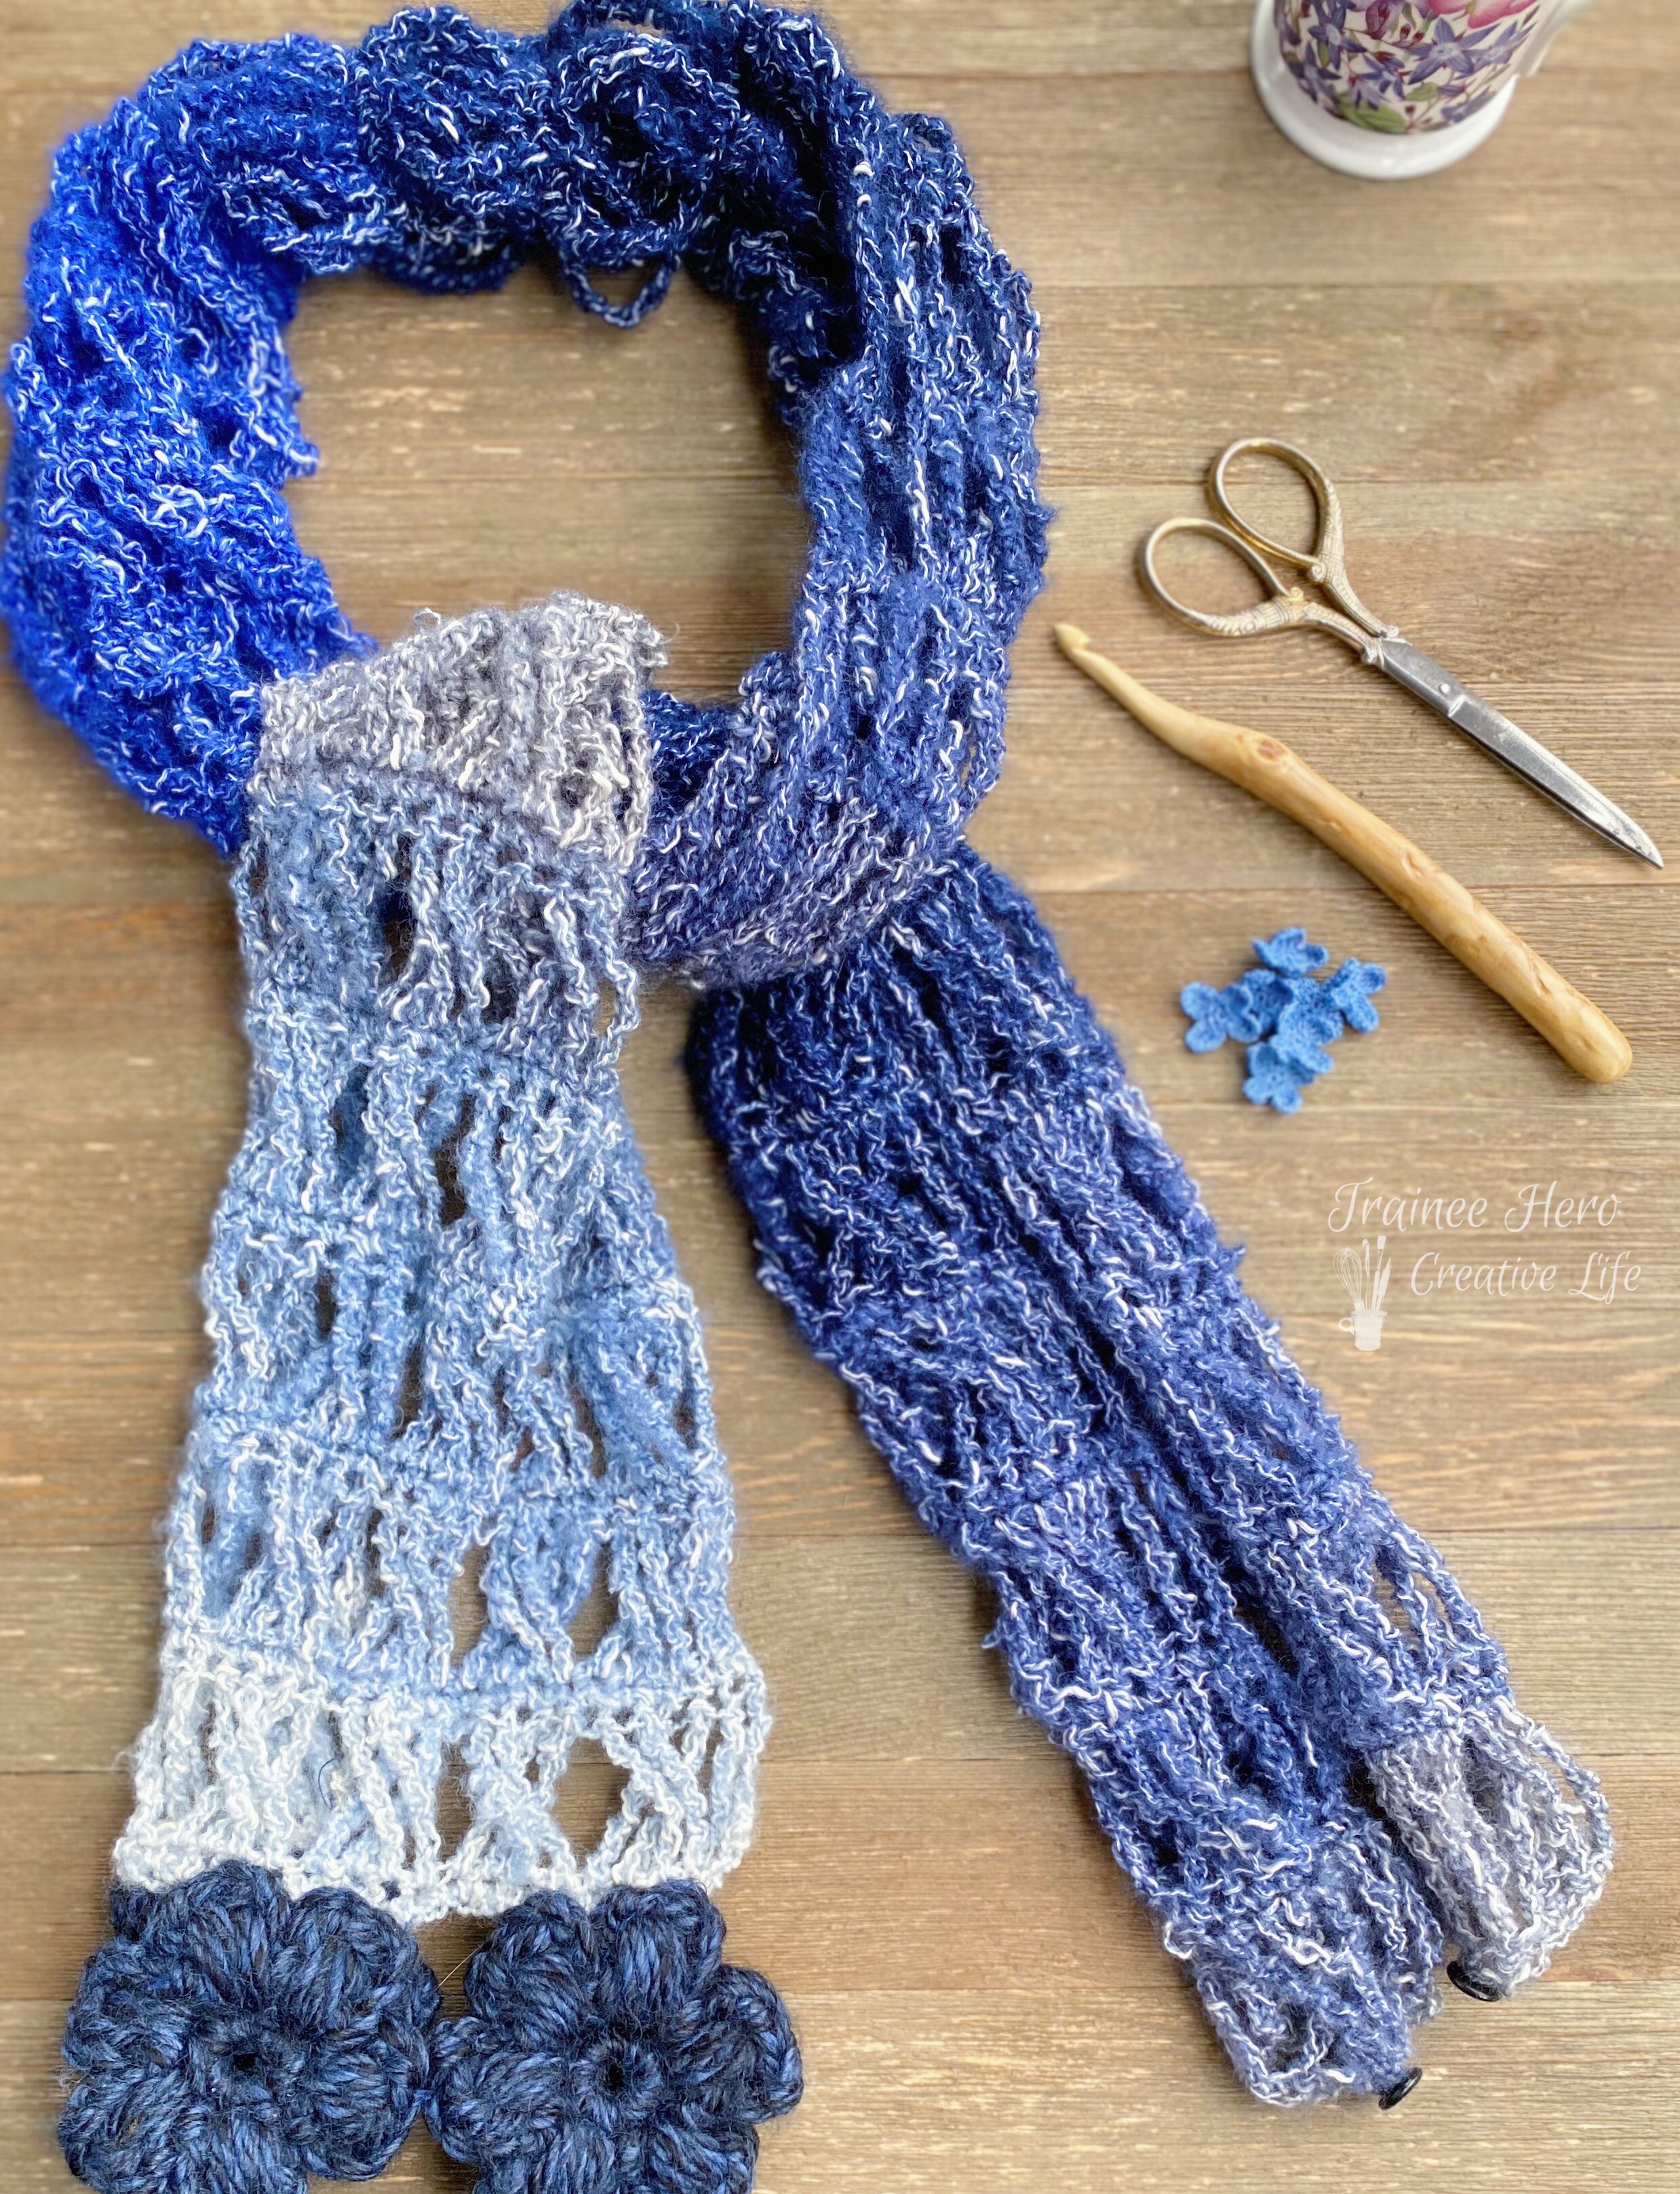 The convertible crochet scarf tied like a long scarf